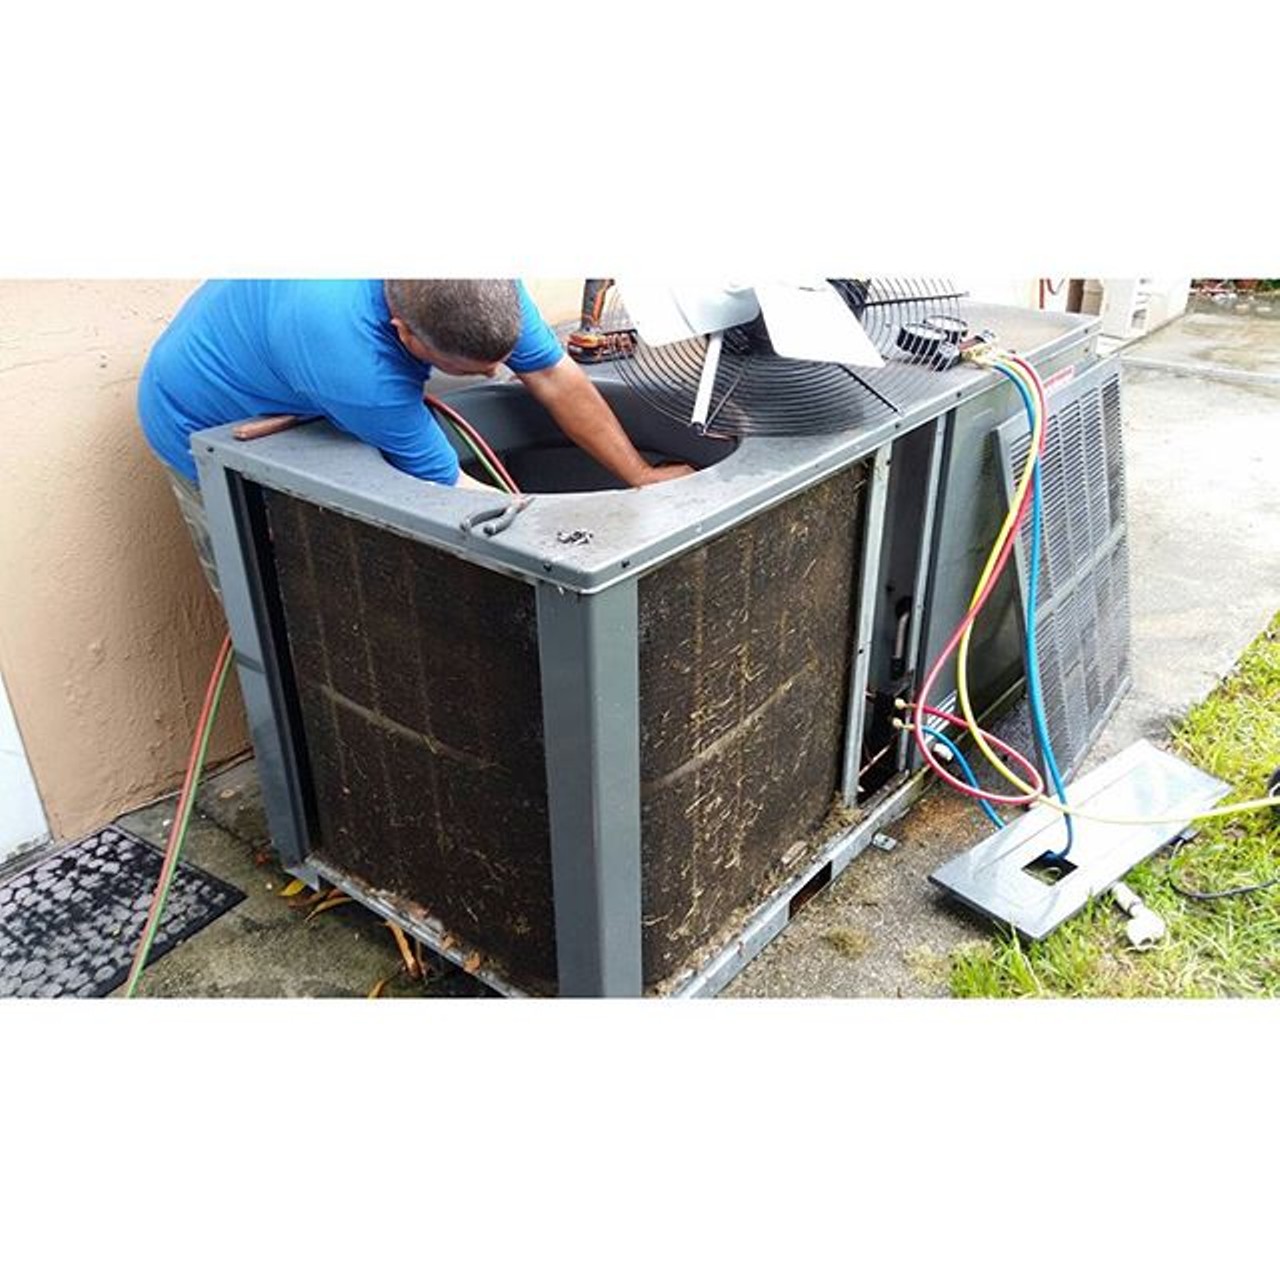 You could die trying to huff Freon.
Photo via Instagram user primetimecooling